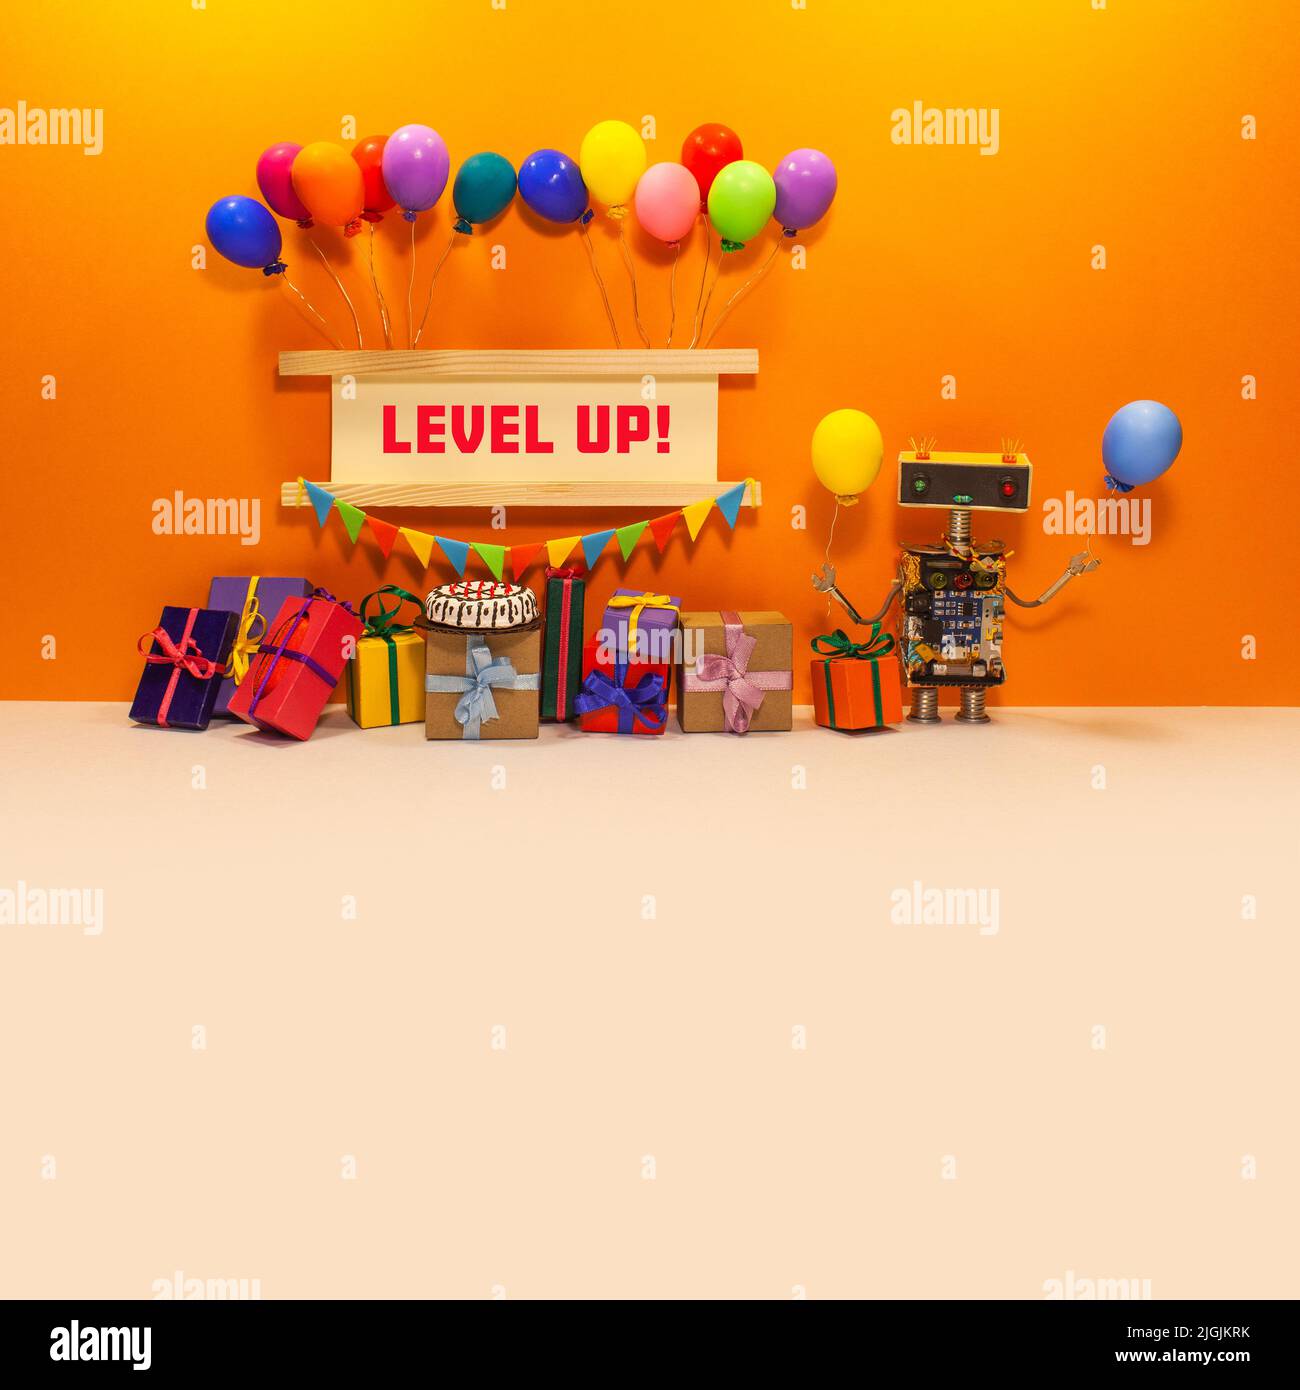 The concept of a holiday birthday card, a toy robot with balloons and gifts near a sign decorated with flags and colorful balloons. Message: Level Up. Stock Photo